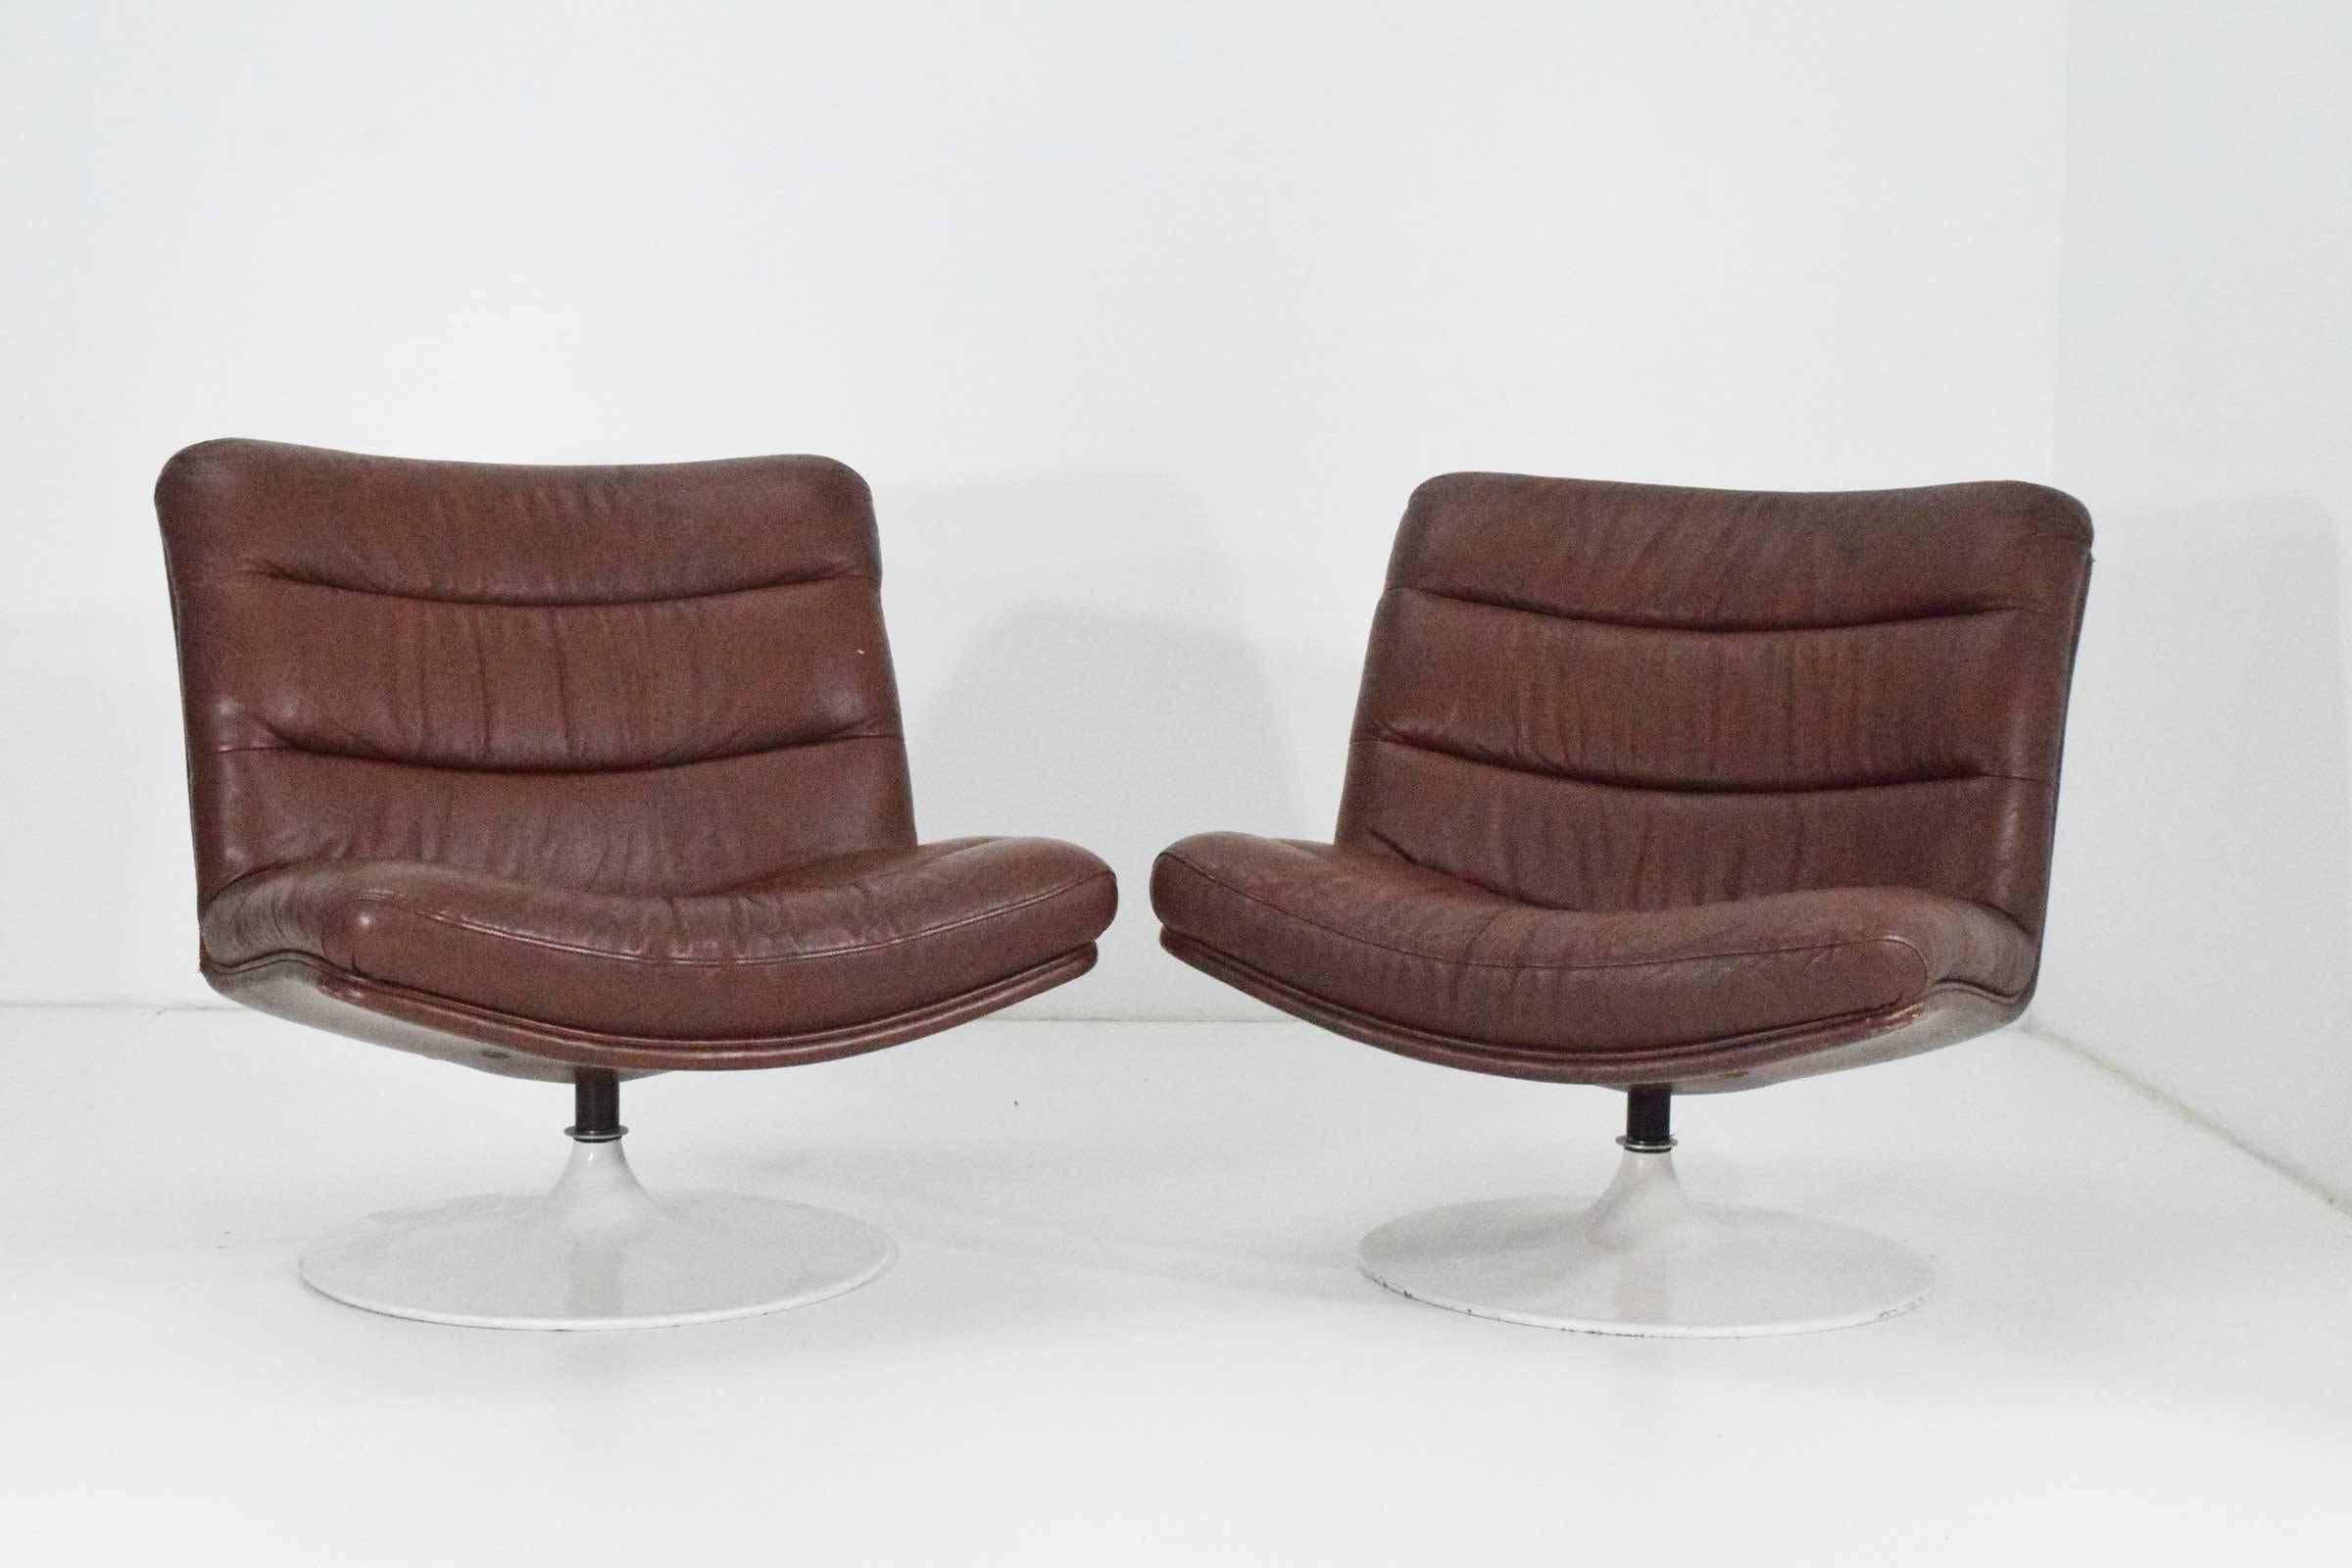 Pair of leather lounge chairs by Geoffrey Harcourt for Artifort. Chairs have metal base and swivel.